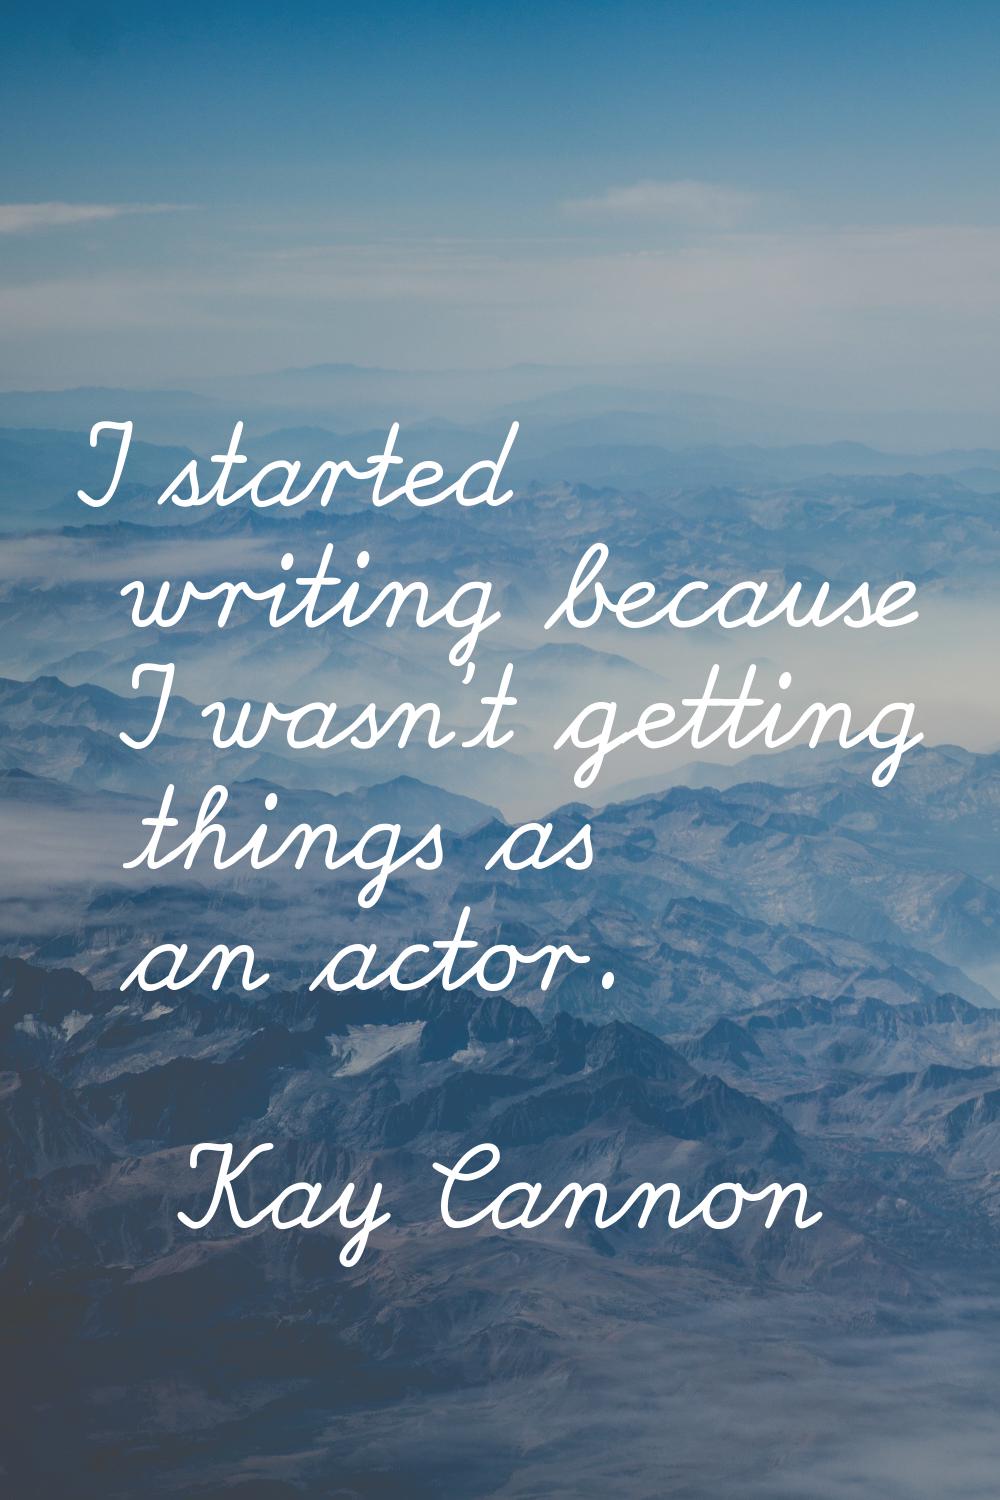 I started writing because I wasn't getting things as an actor.